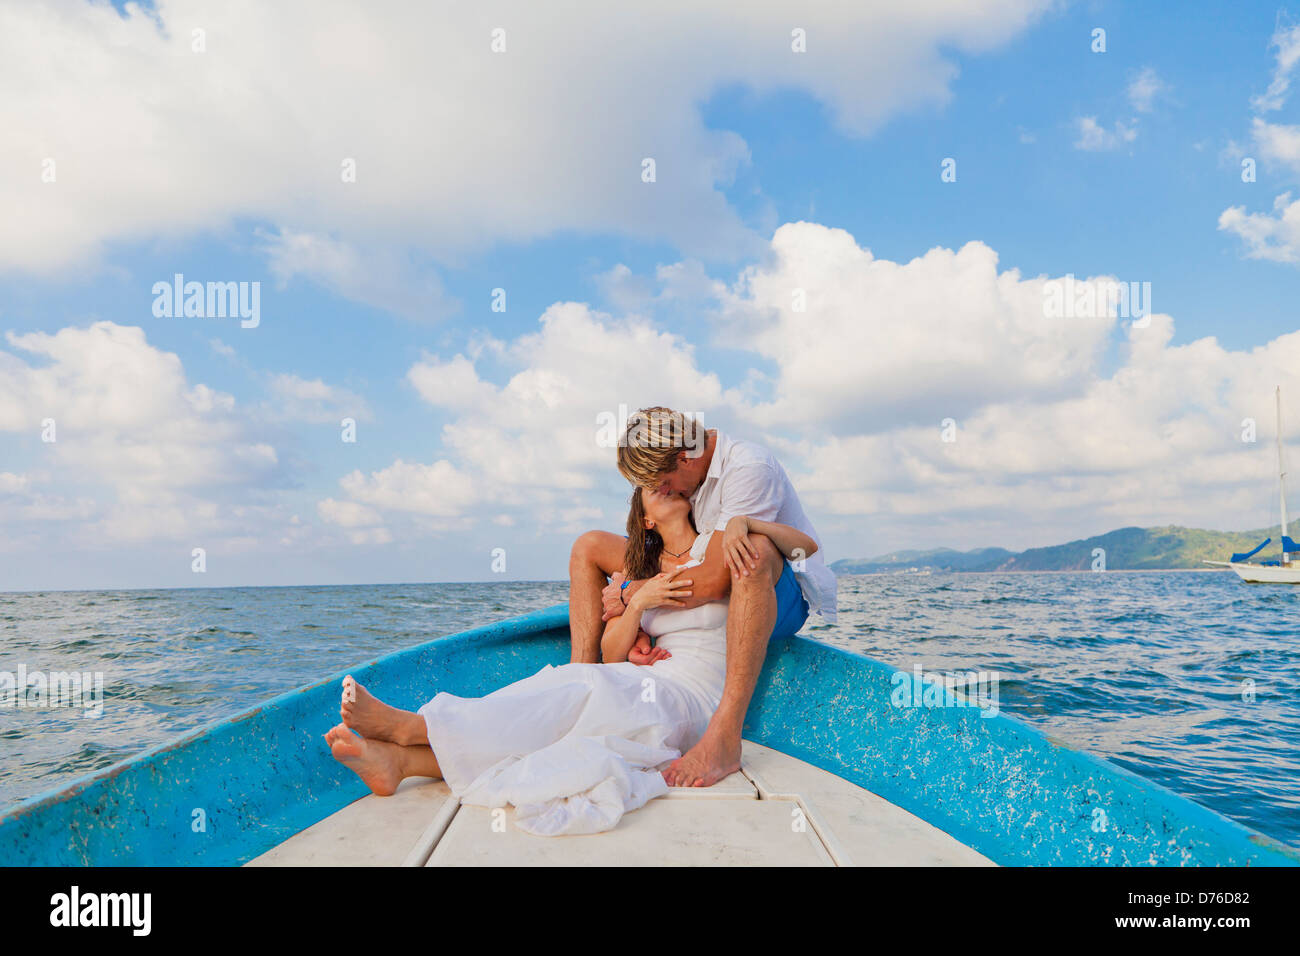 Man and woman embracing in bow of boat Stock Photo